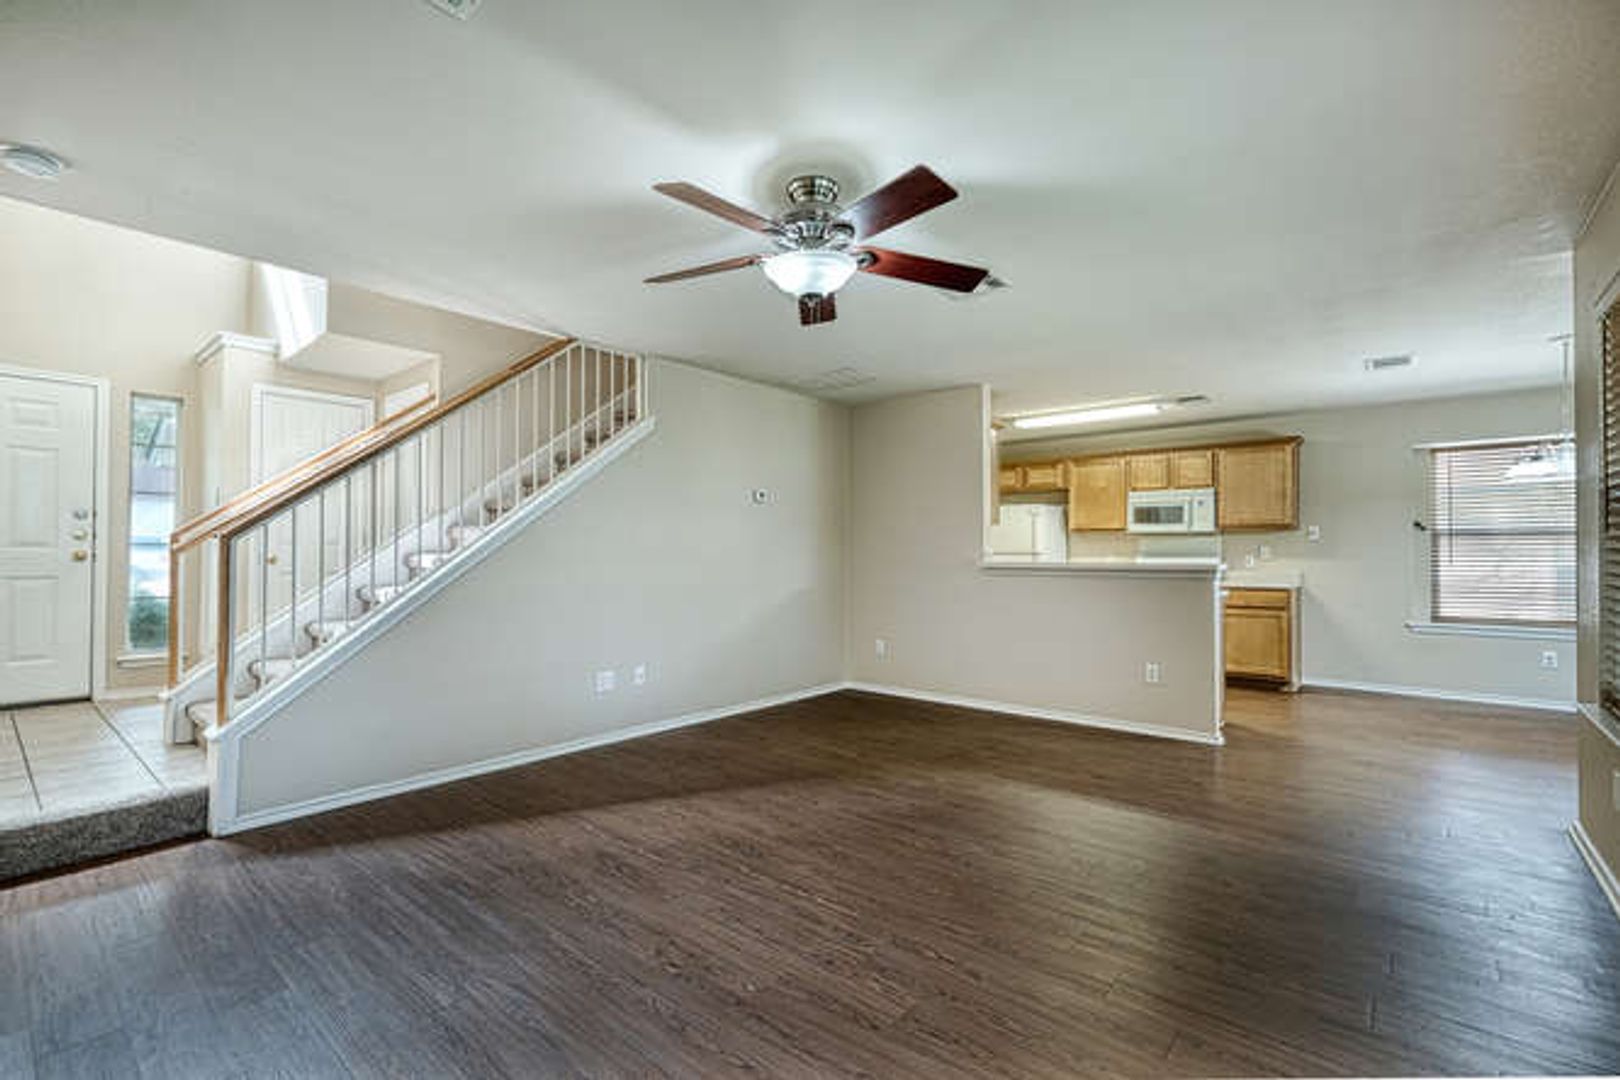 Nice 3B/2.5B two story home in Round Rock Ranch!